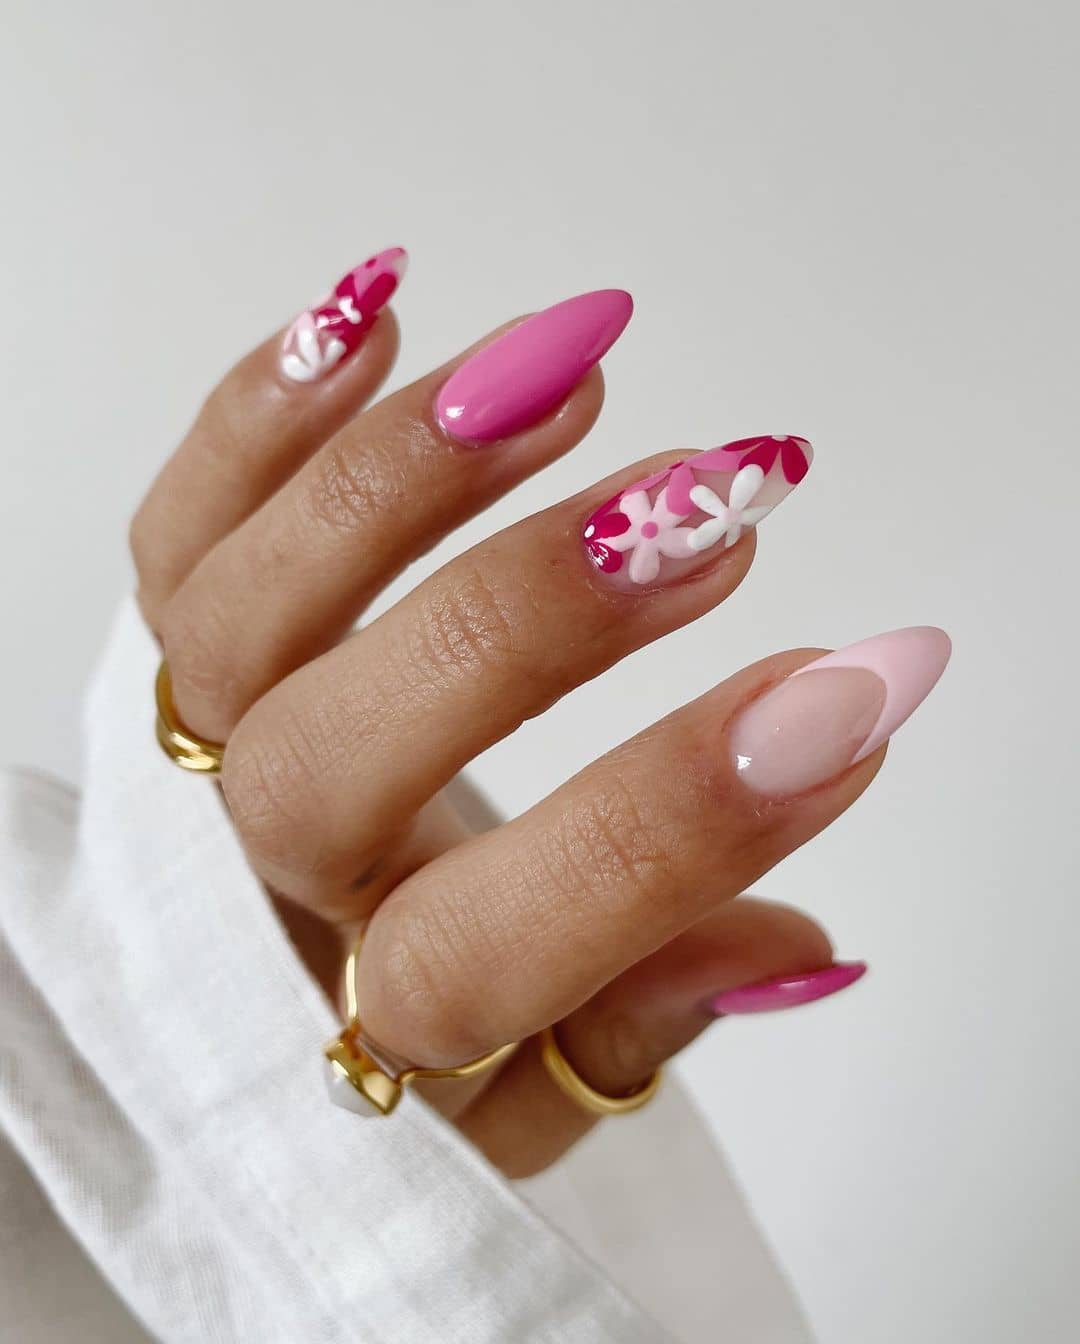 Over 100 Bright Summer Nail Art Designs That Will Be So Trendy images 64